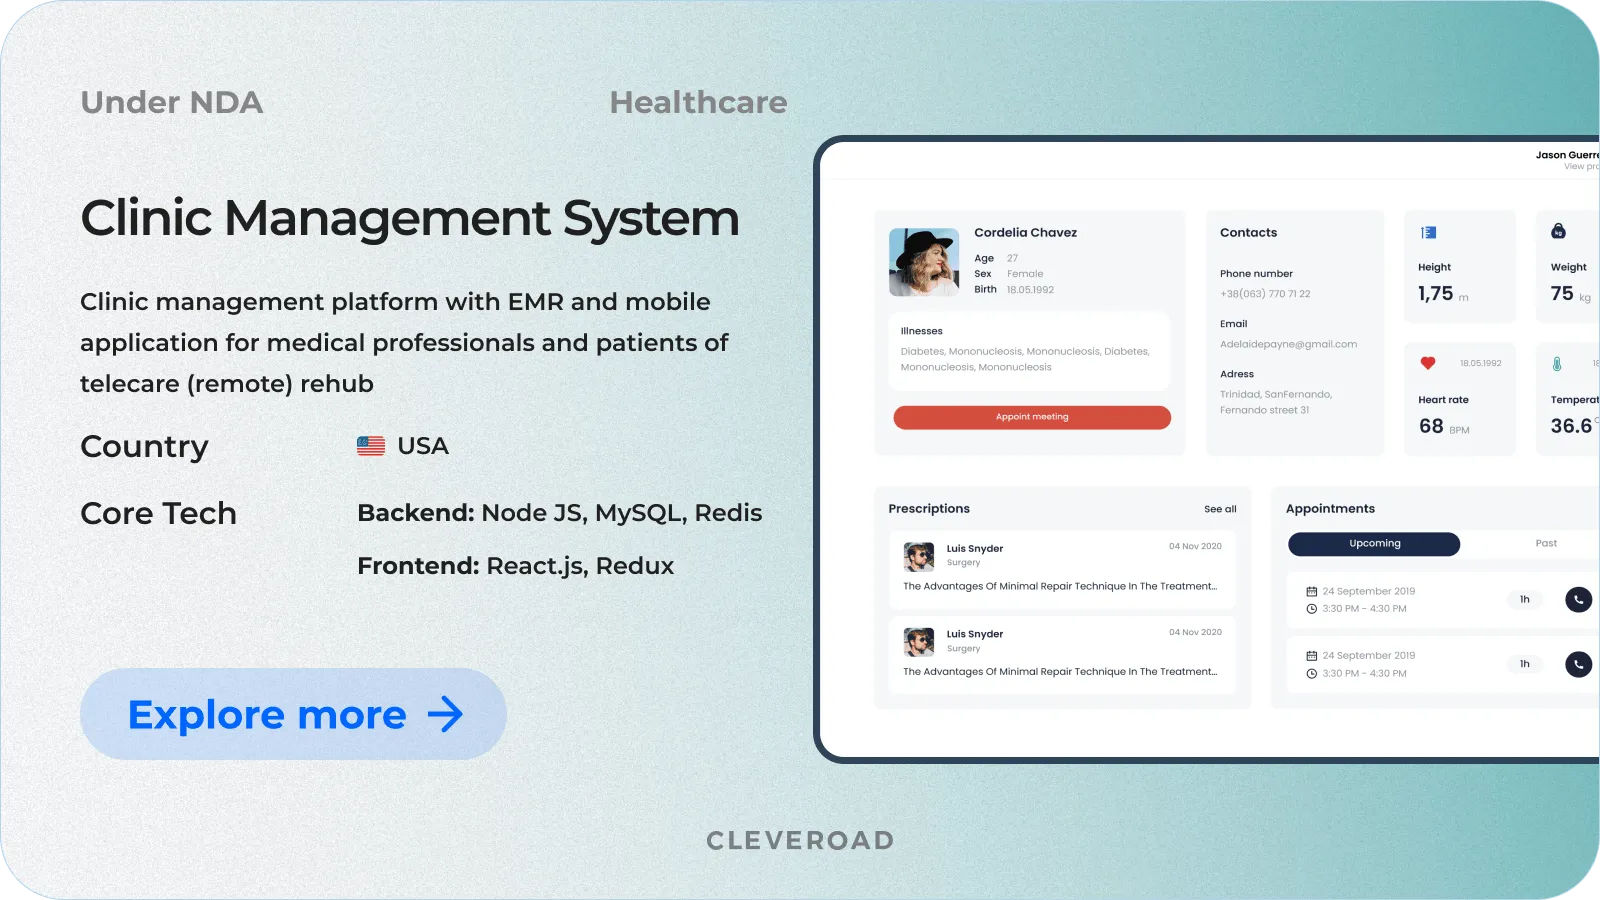 Clinic Management System built by Cleveroad